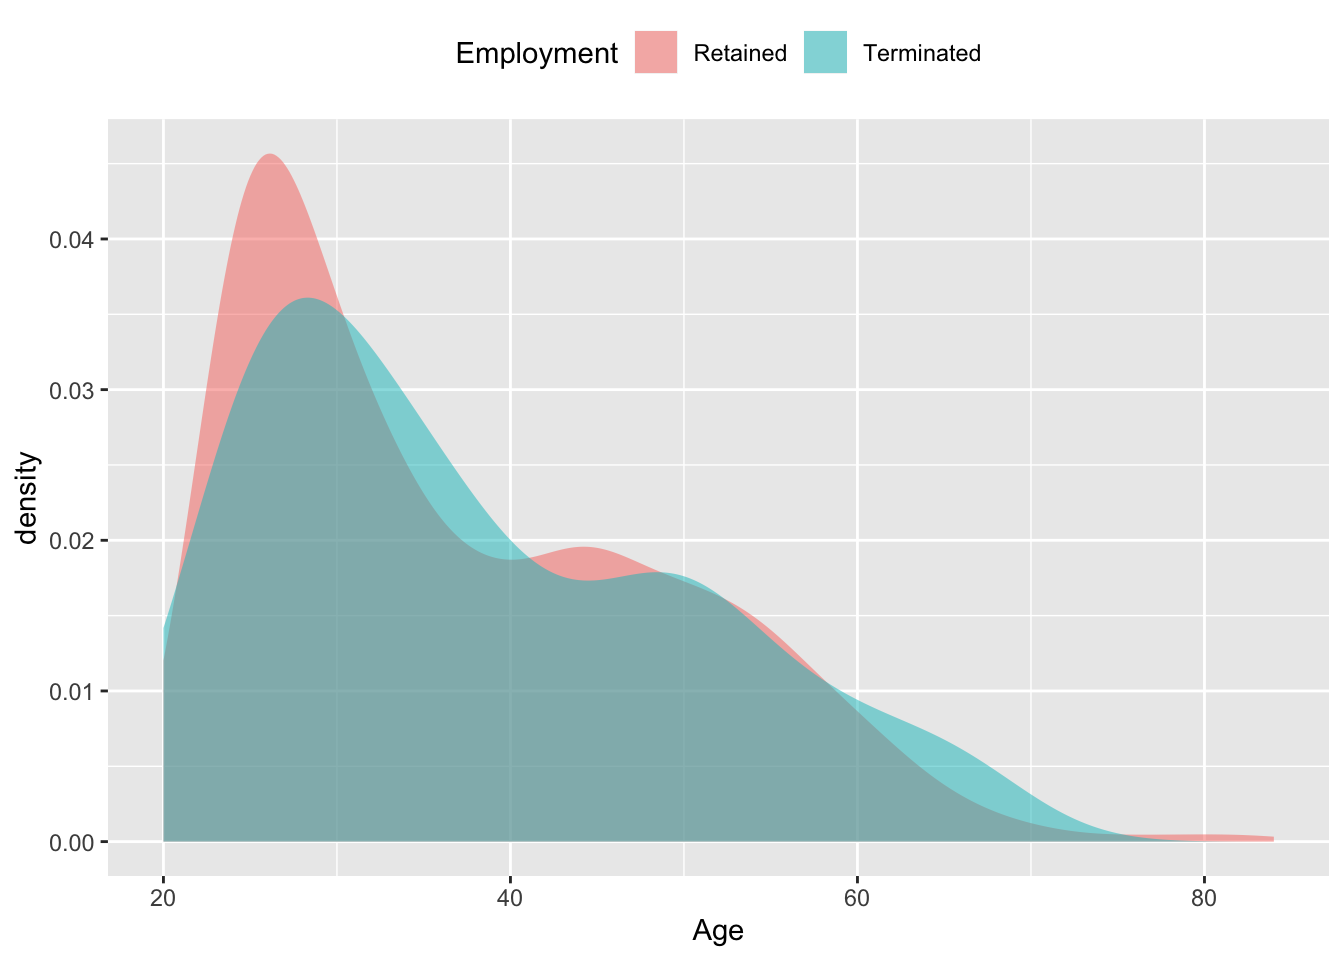 The age distribution of employees at a national firm whose employment was terminated, compared to the age distribution for those who were retained.